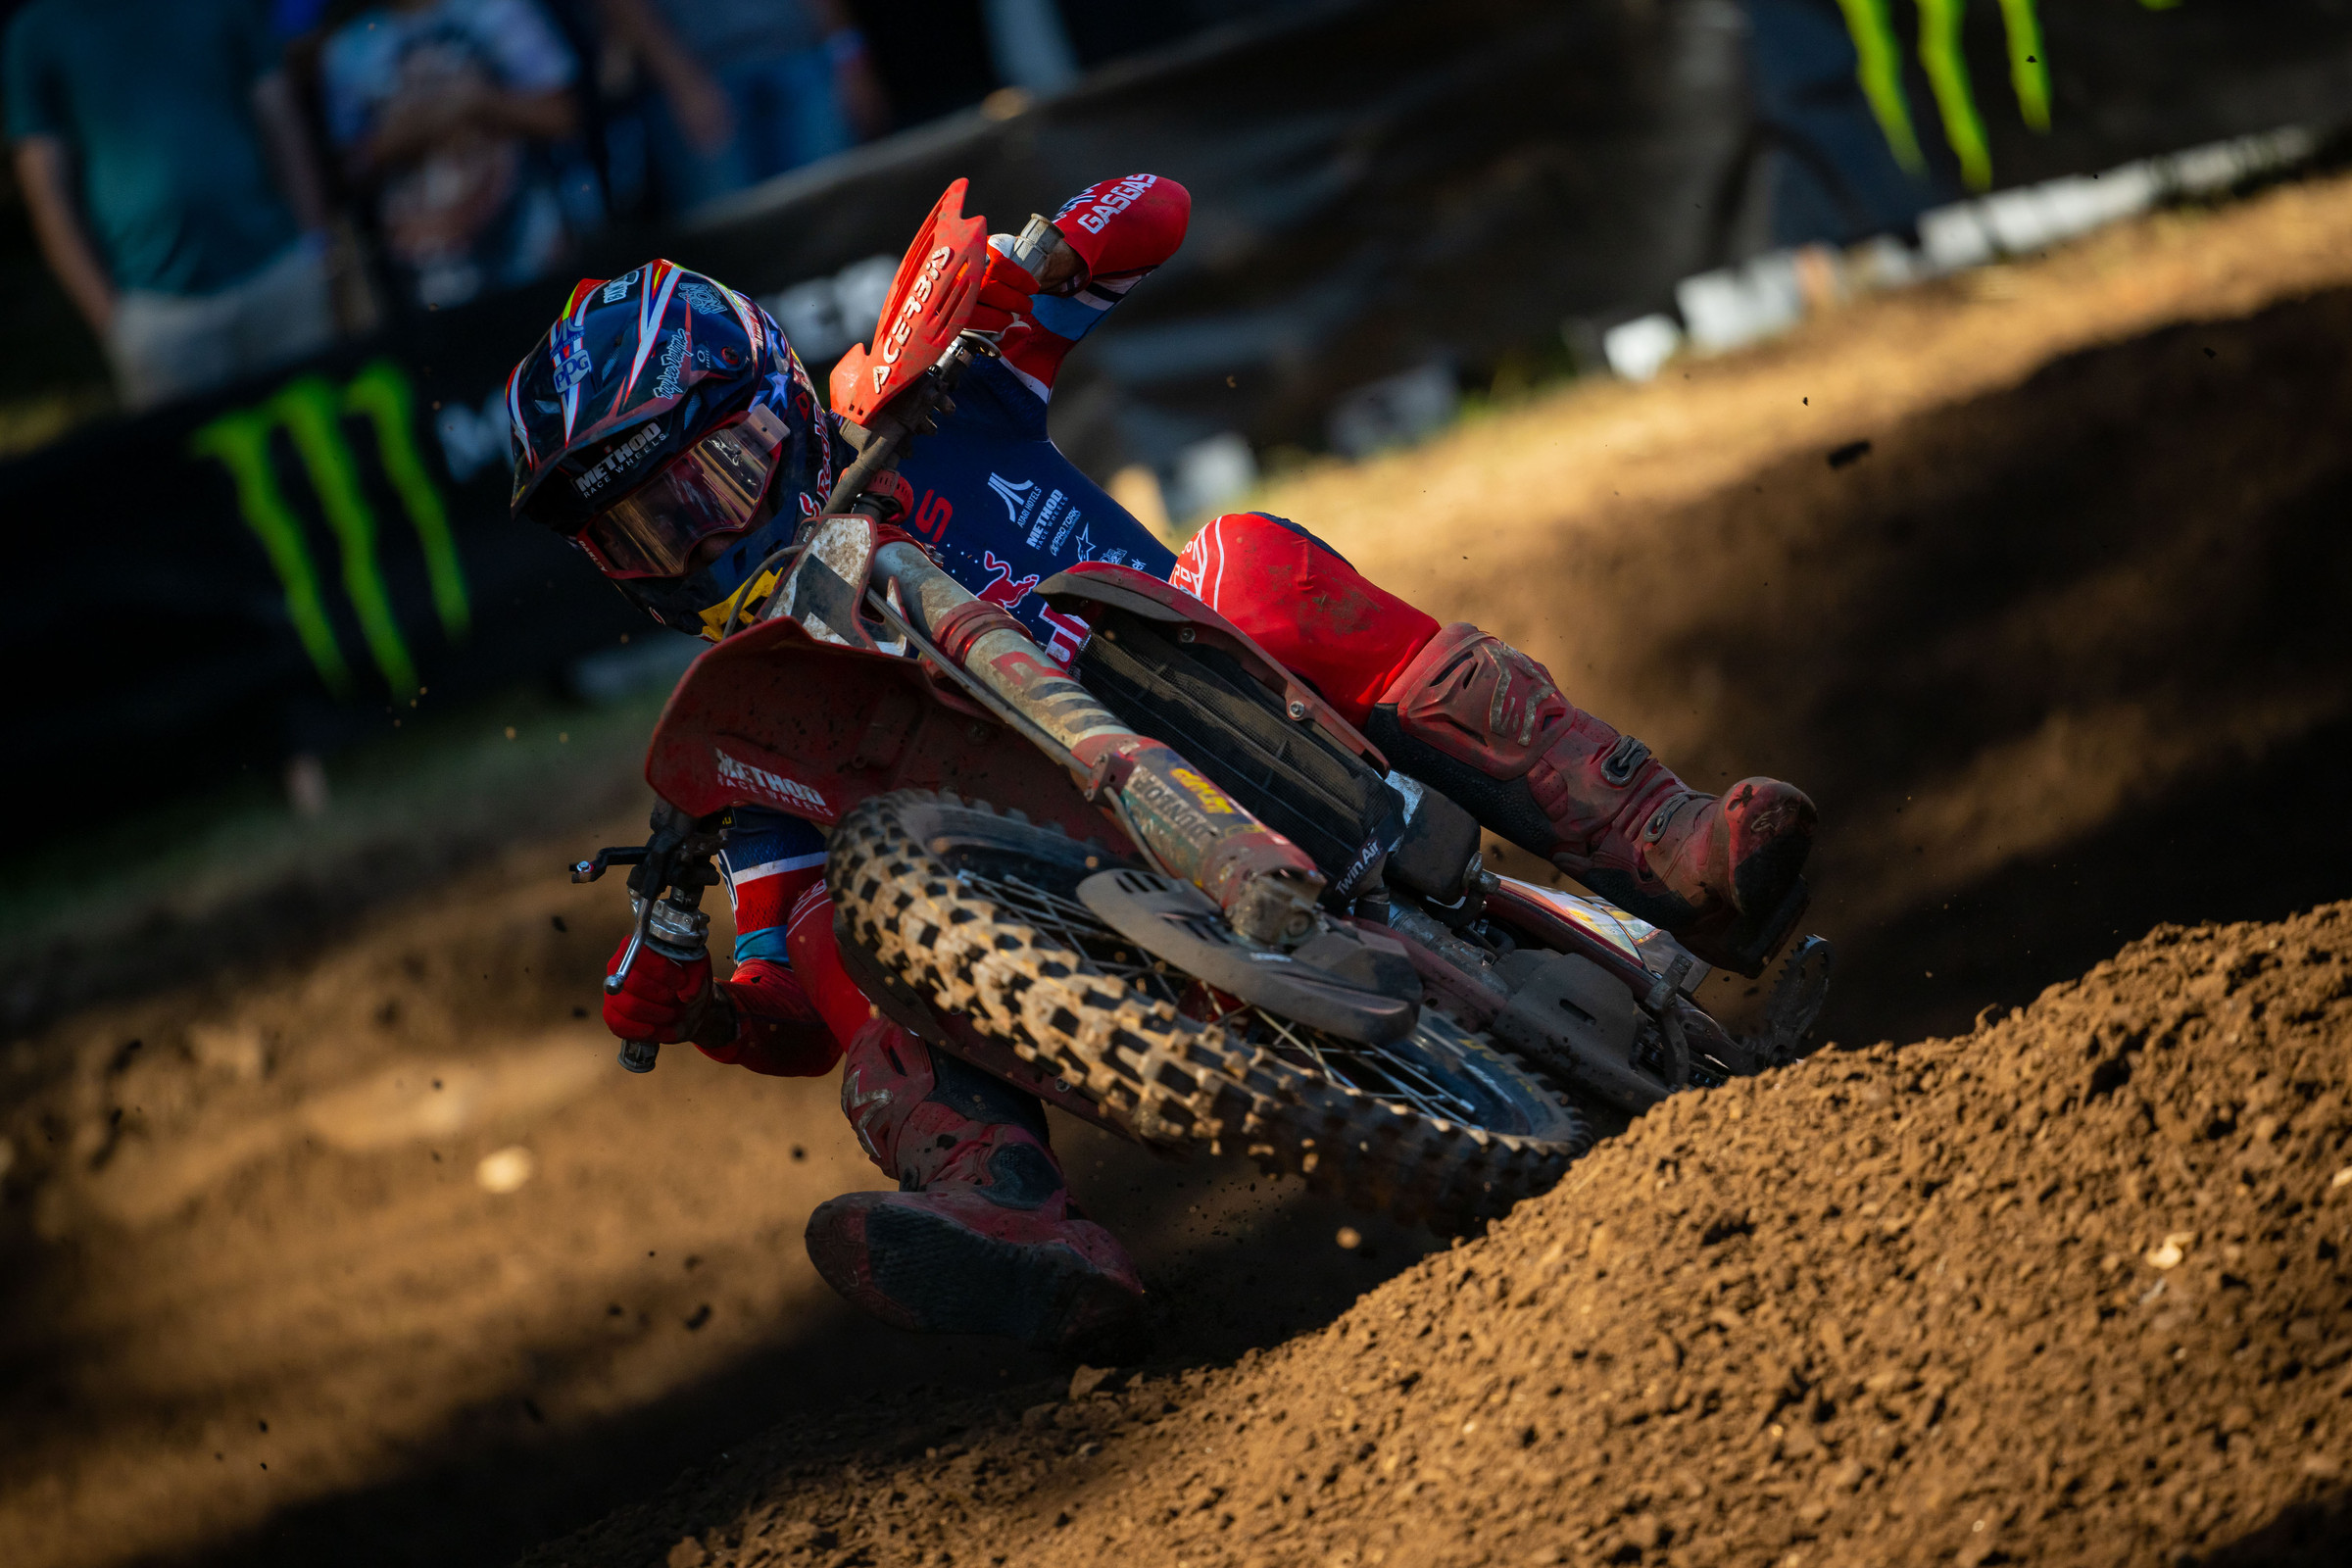 How to Watch/Stream Unadilla National and MXGP of Finland on TV and Online